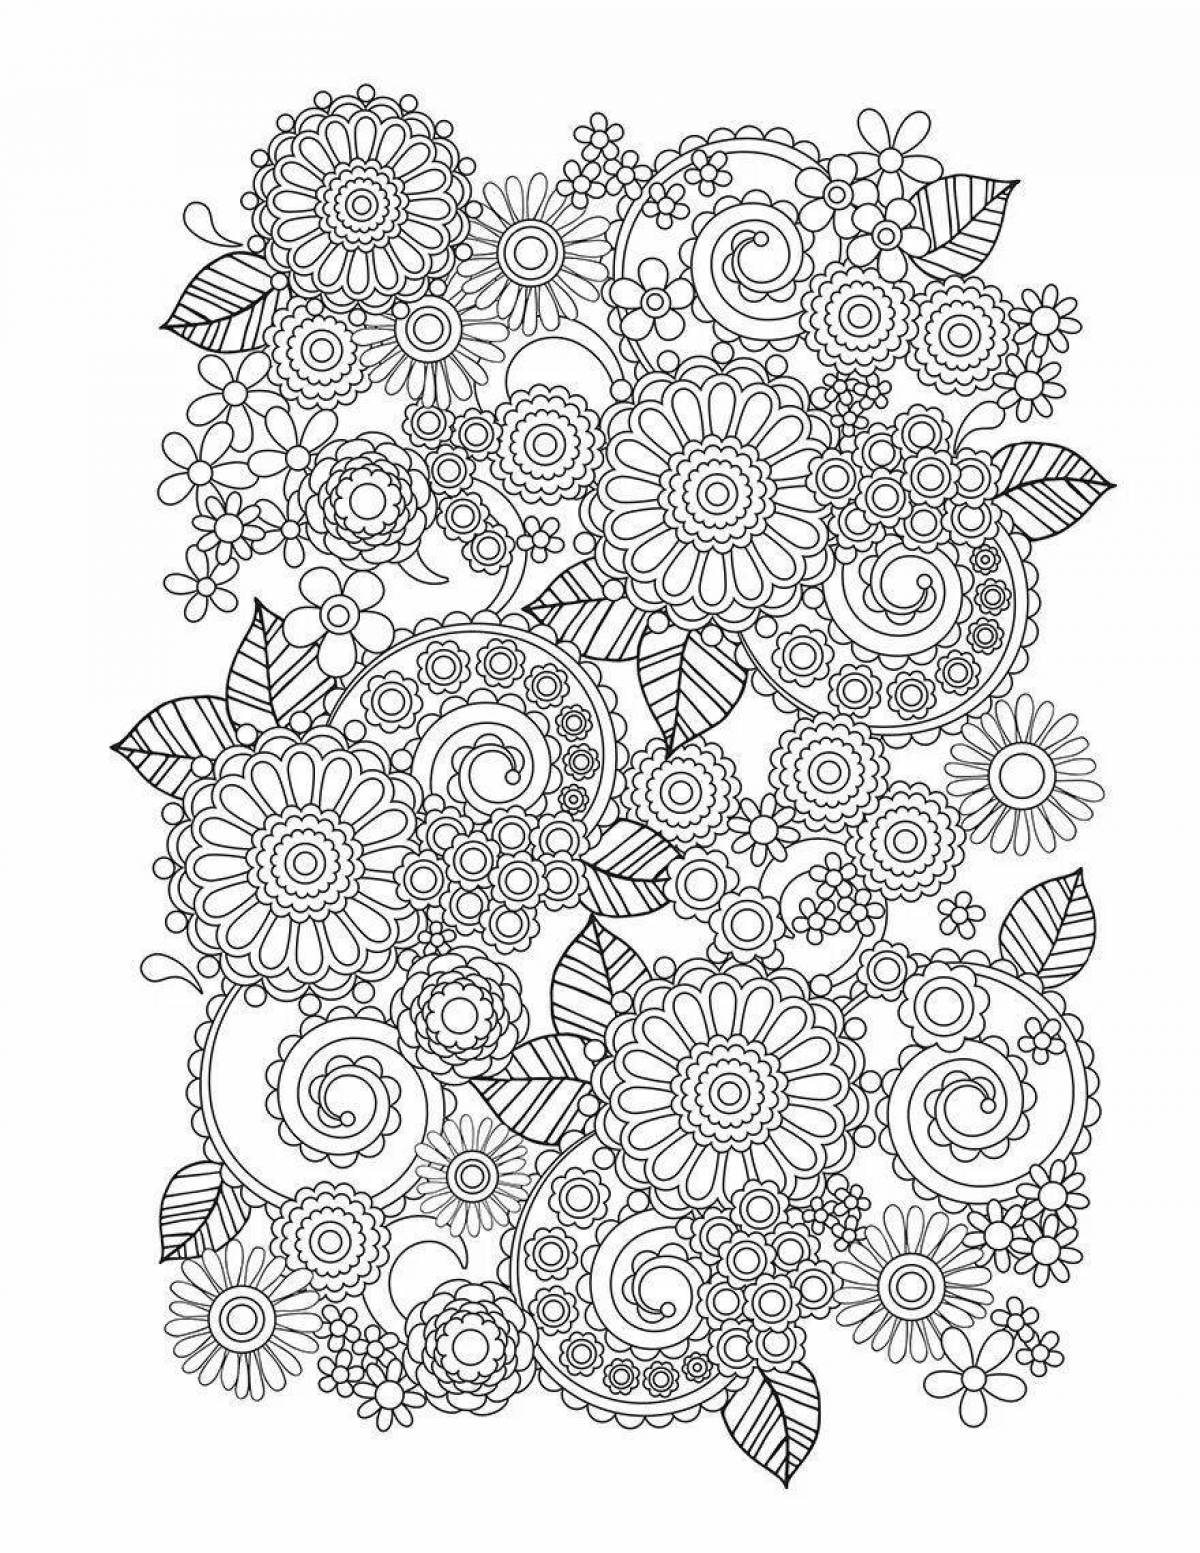 Coloring book for adults, large